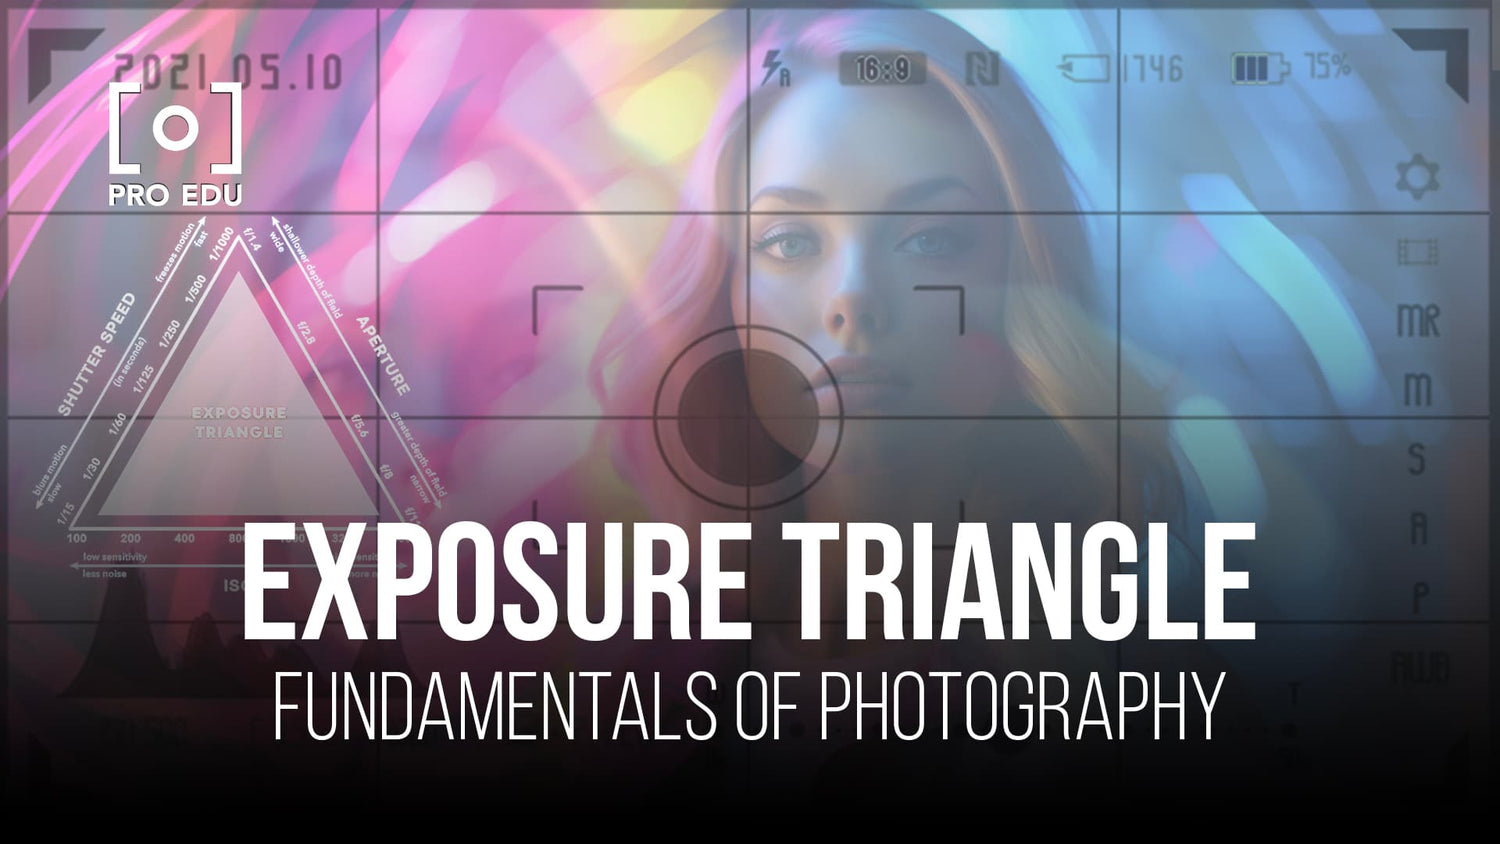 Beginner's guide to decoding the exposure triangle in photography for perfect exposure